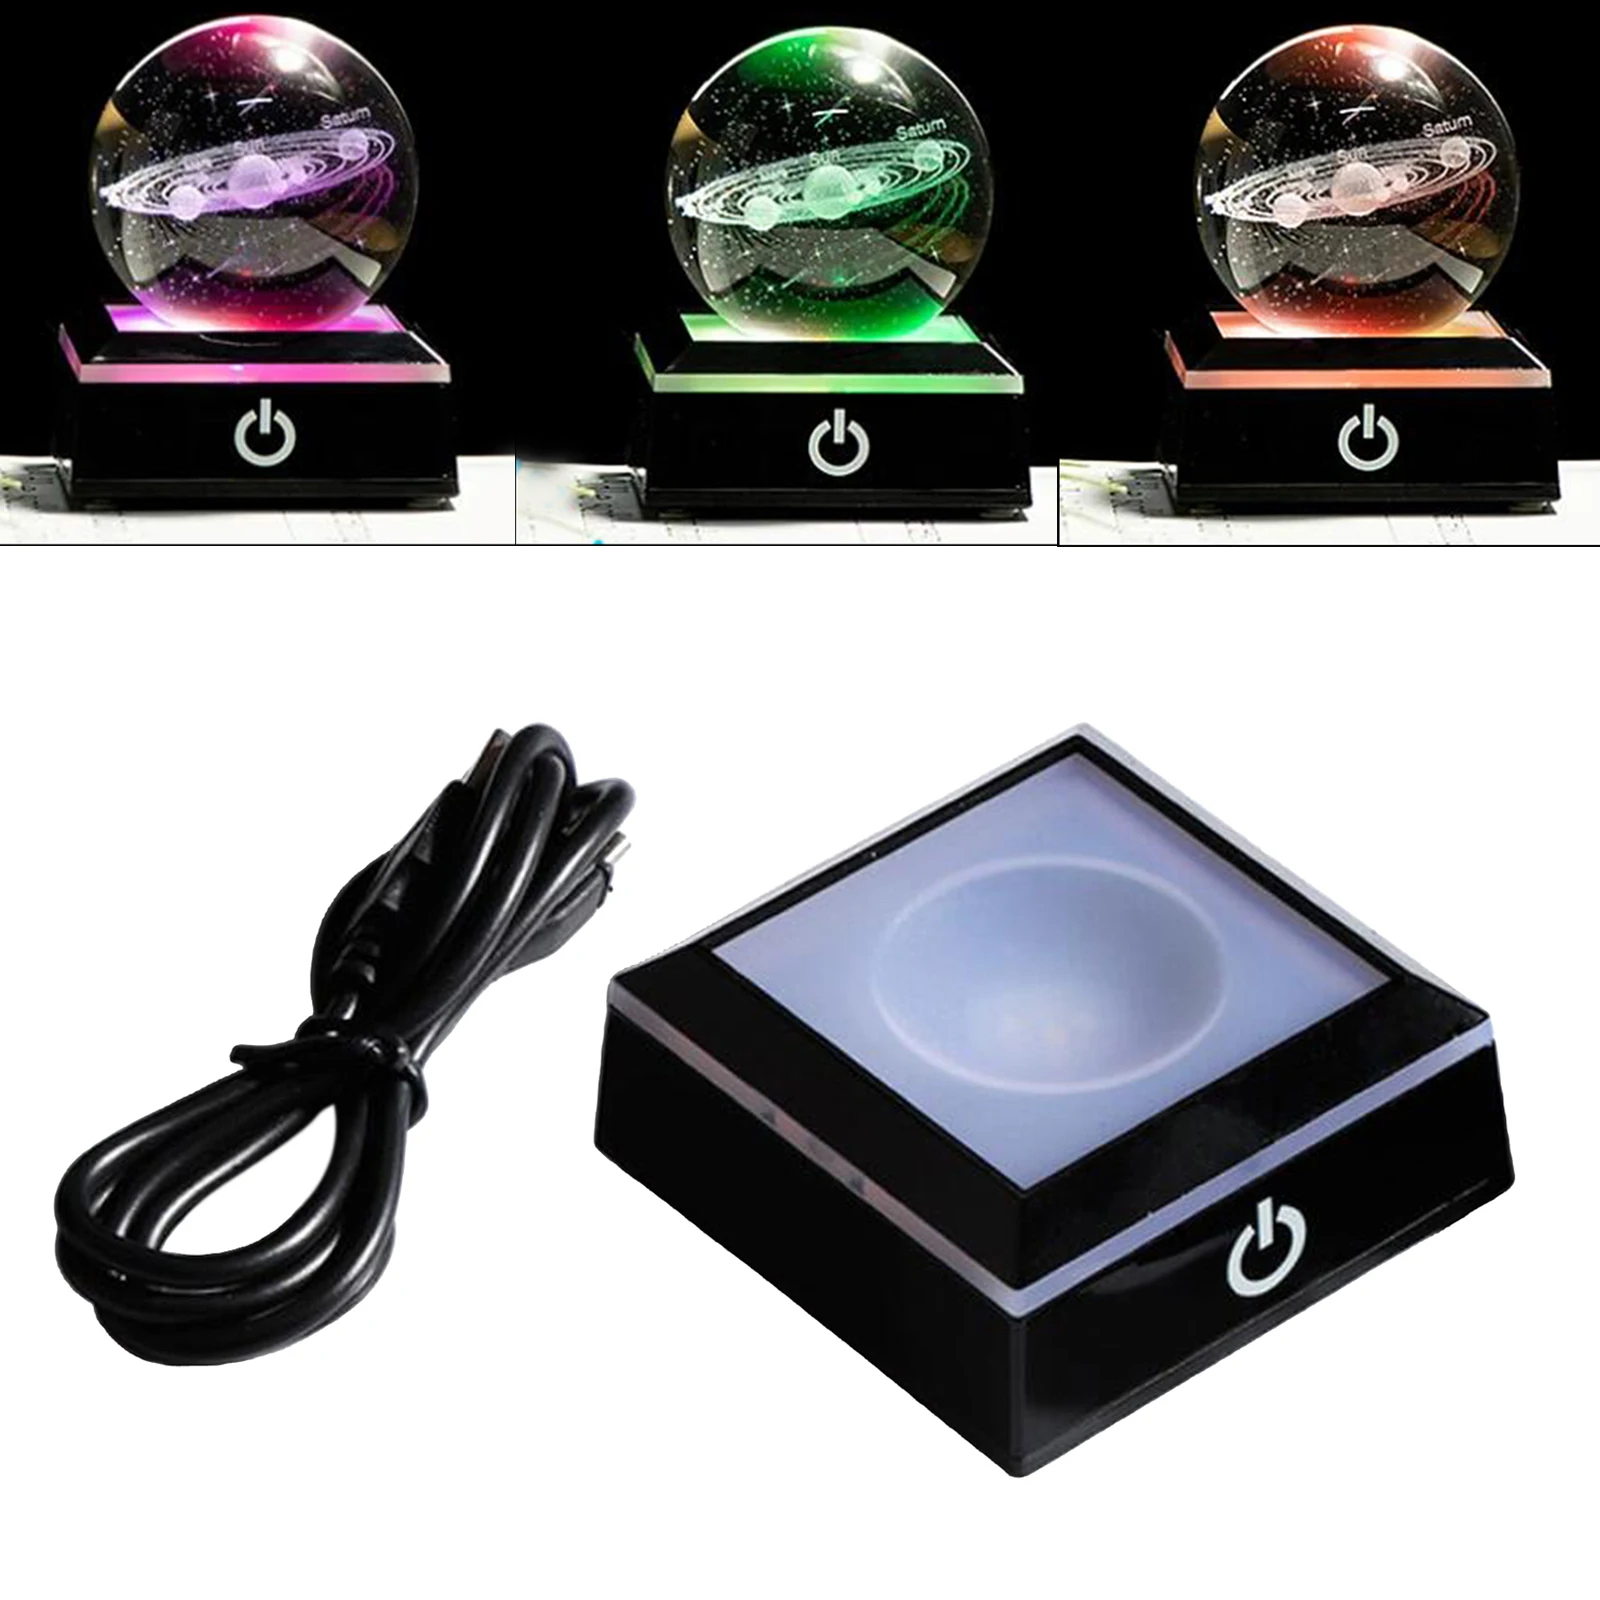 LED Light Base Lights Display Holder USB Powered Base Stand Glass Art Colorful Lighted Square Stand Display Plate